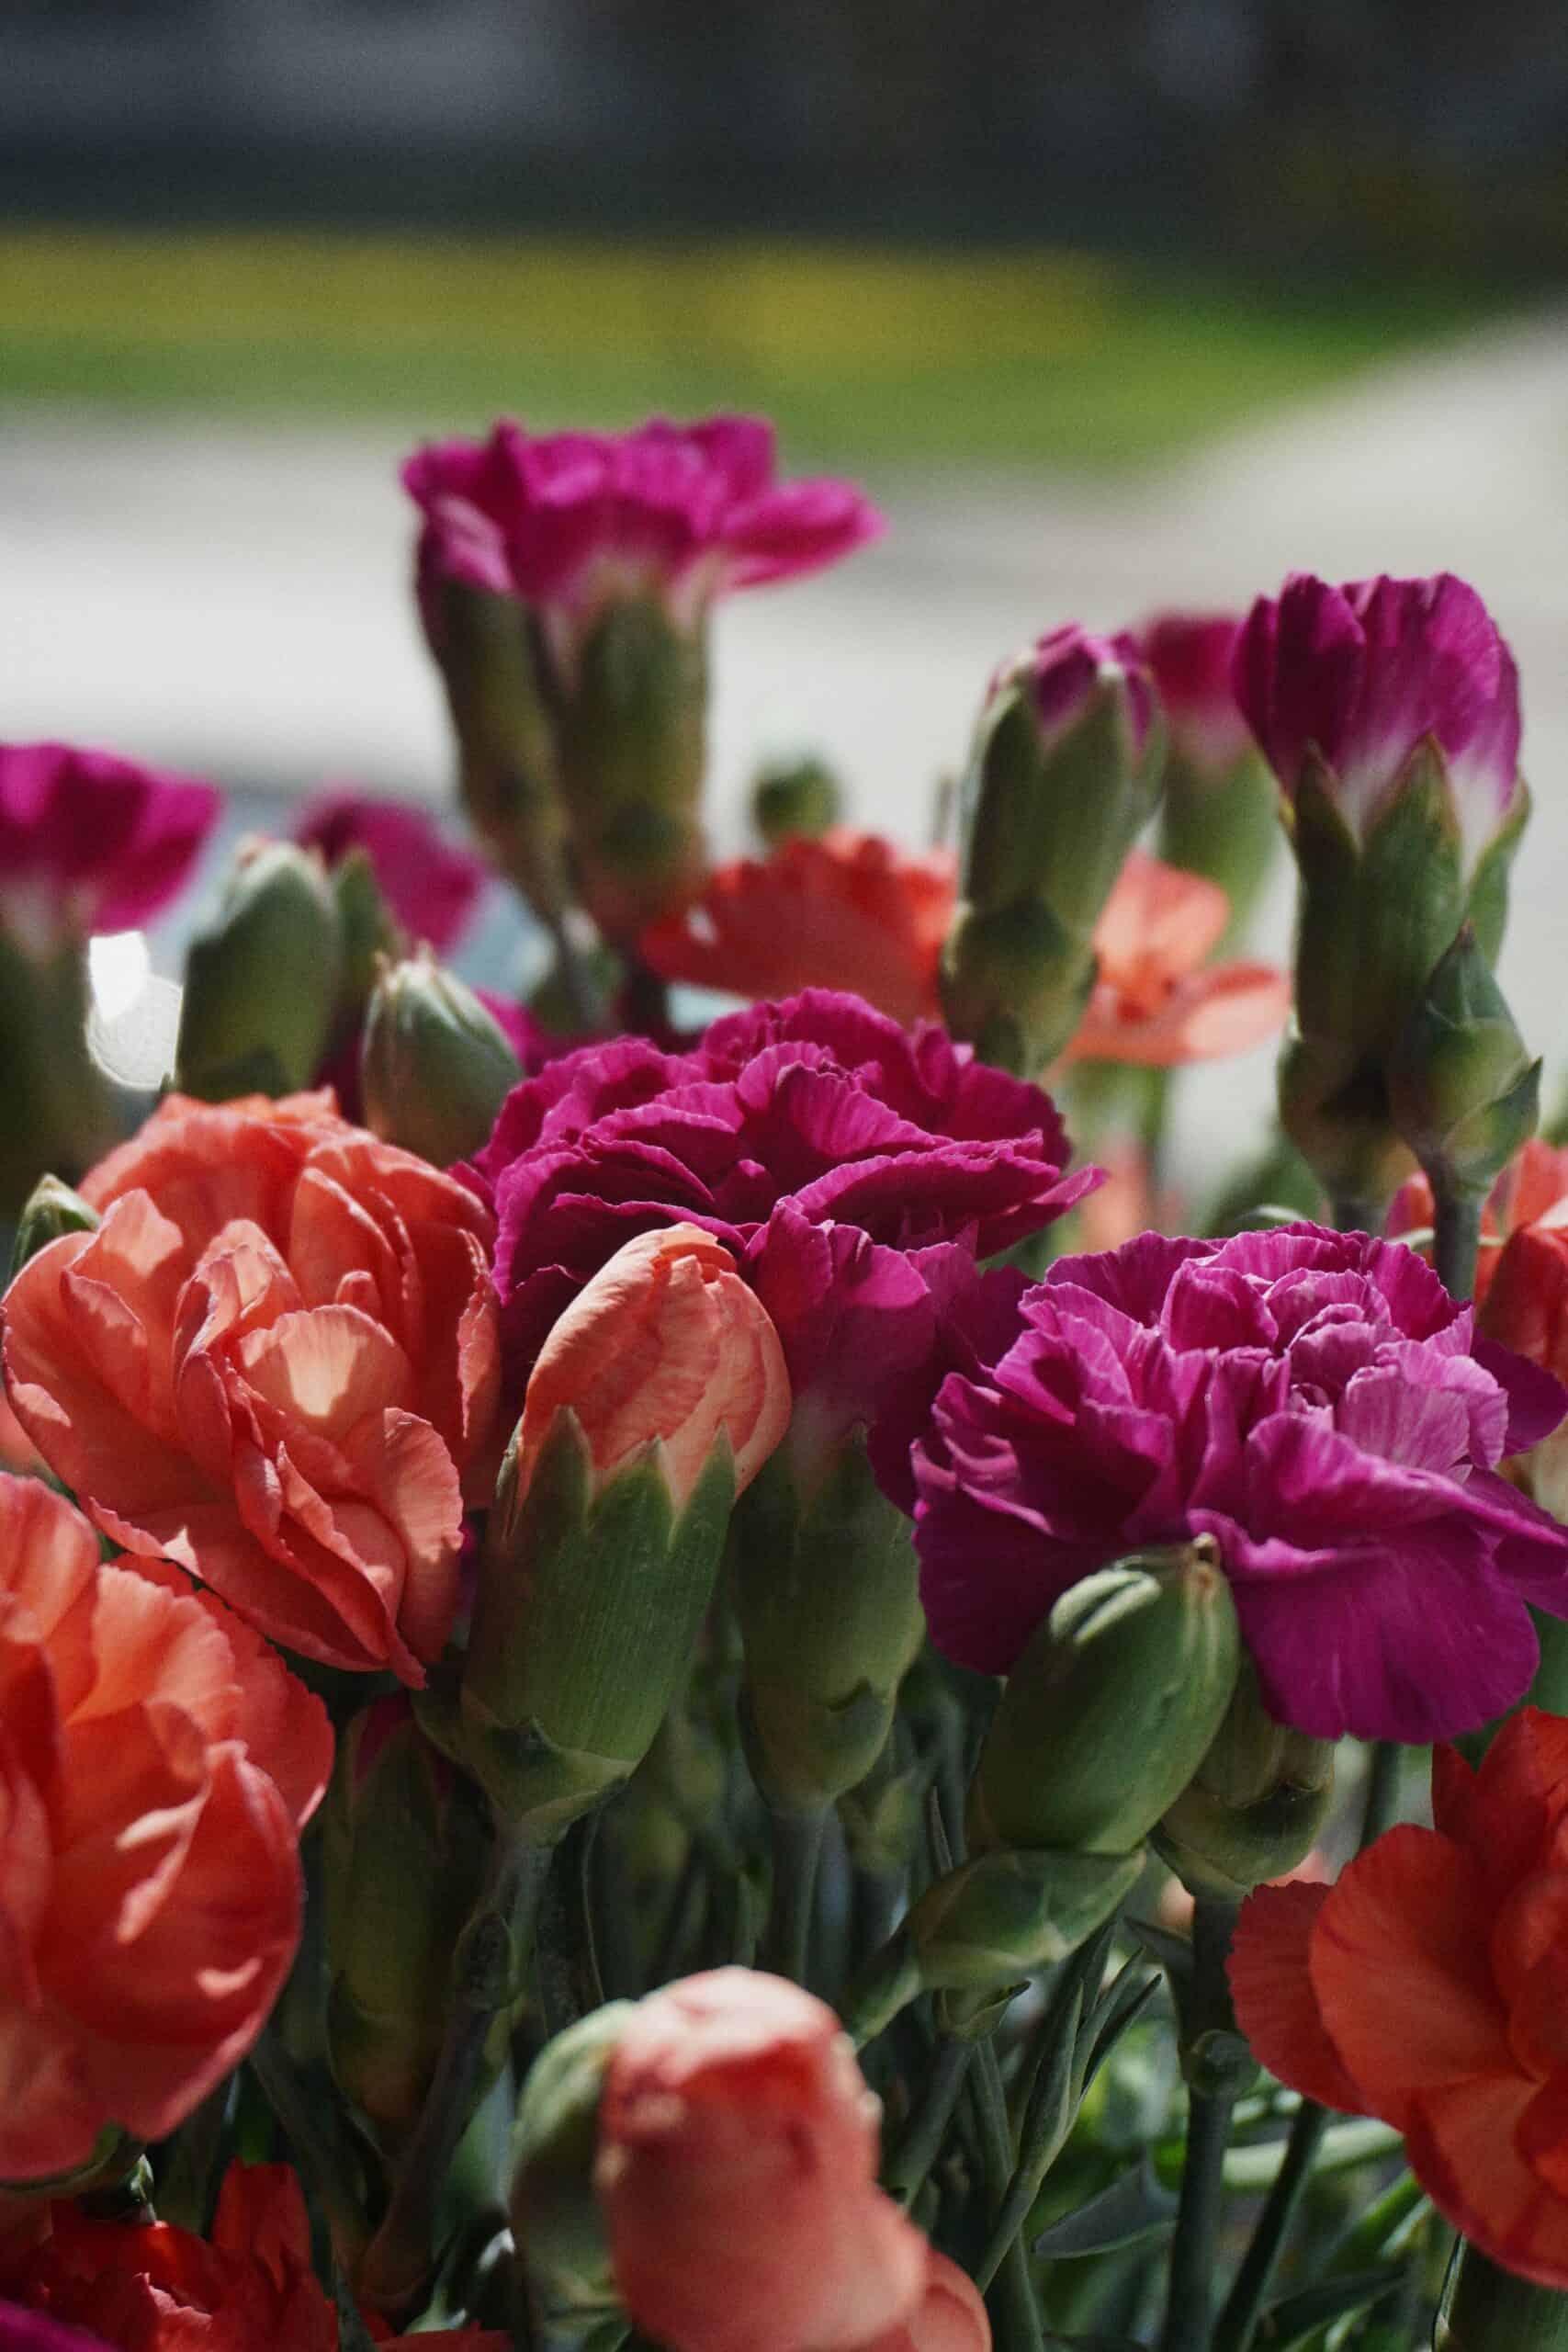 How to plant or care for carnations